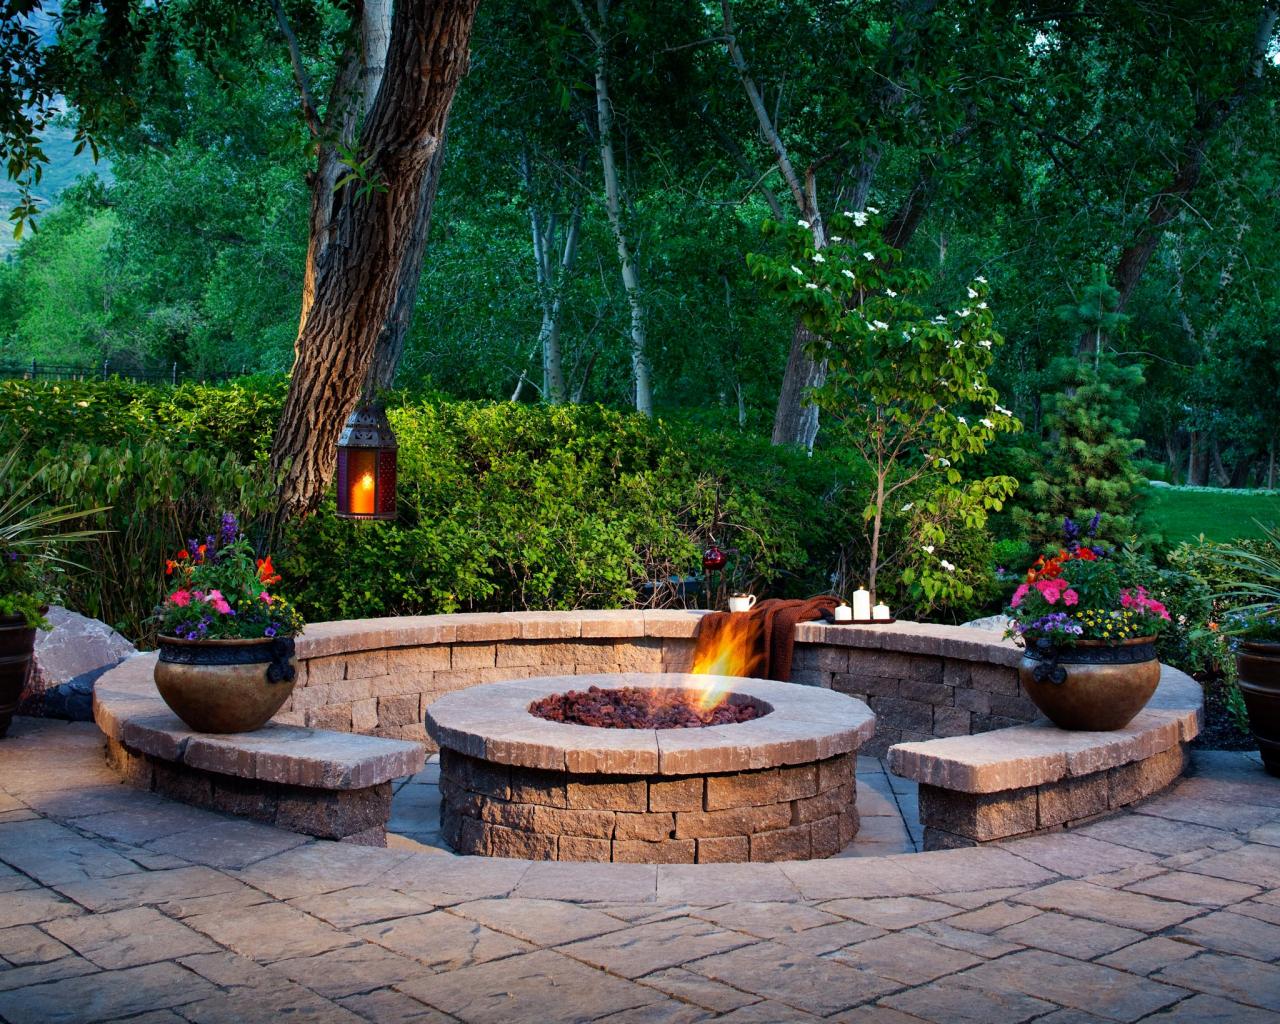 Designing A Patio Around Fire Pit Diy, Fire Pit Set Up Ideas